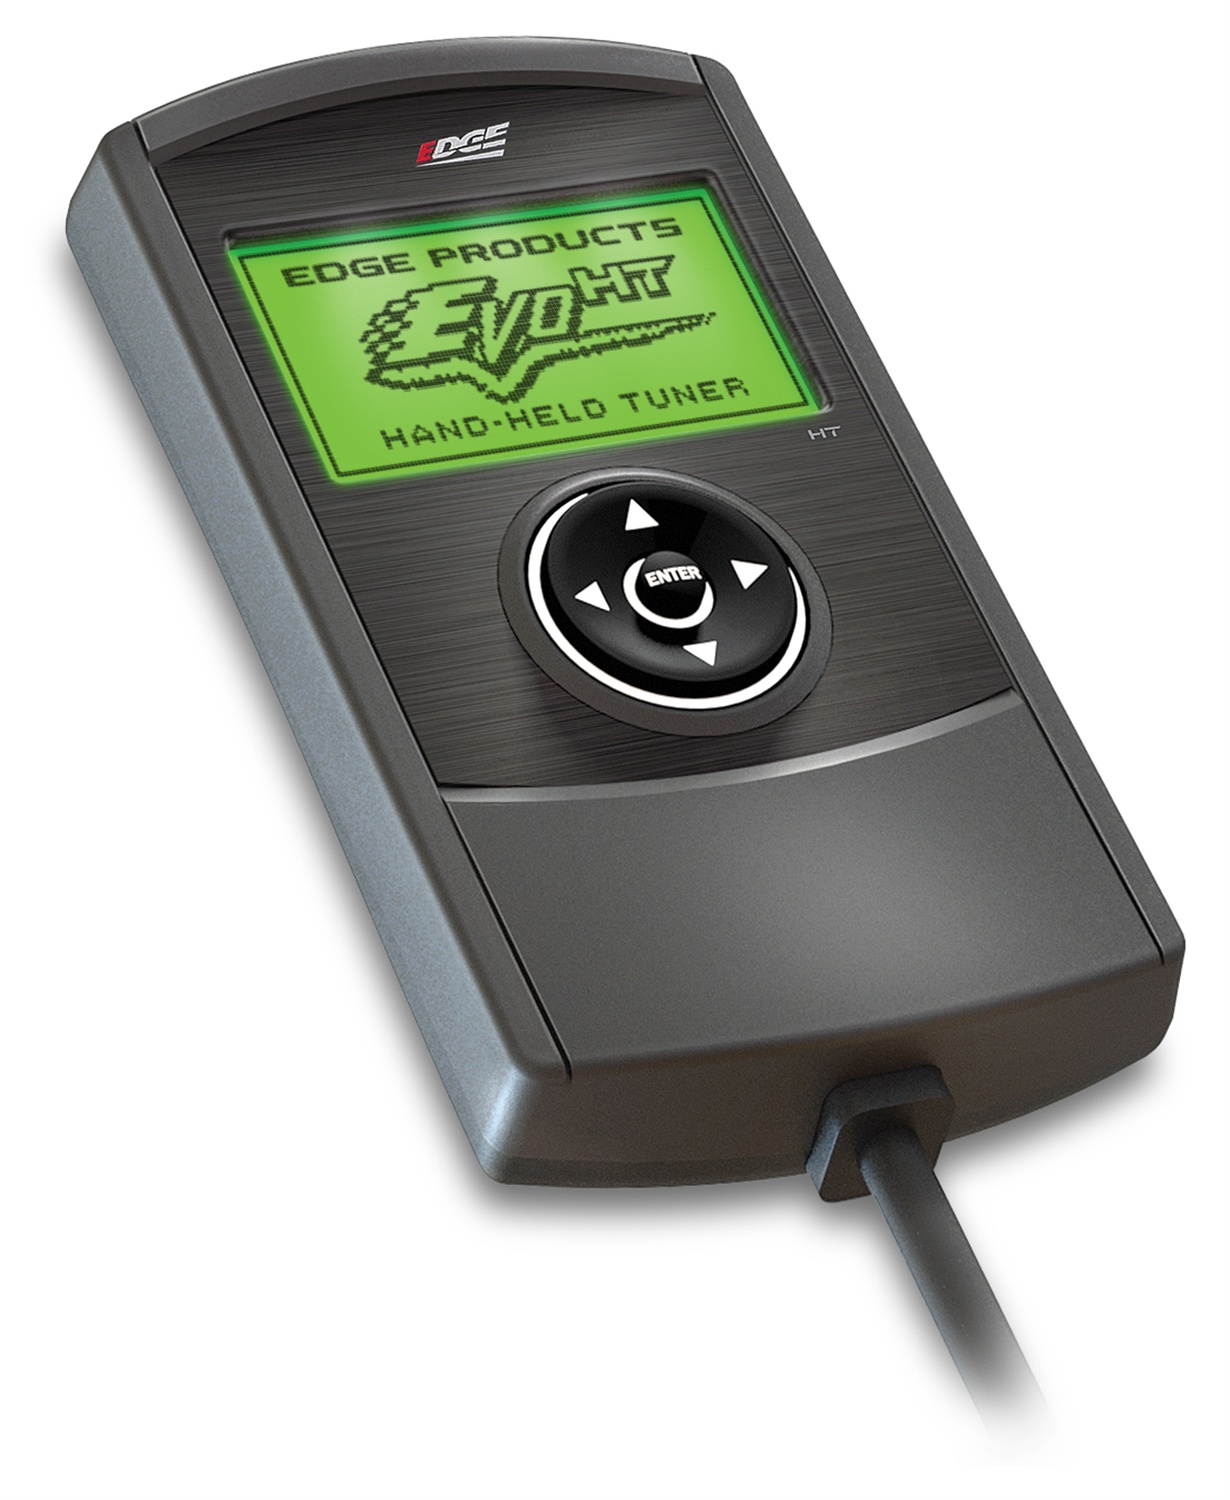 Edge Products Edge Products 16030 EvoHT Programmer